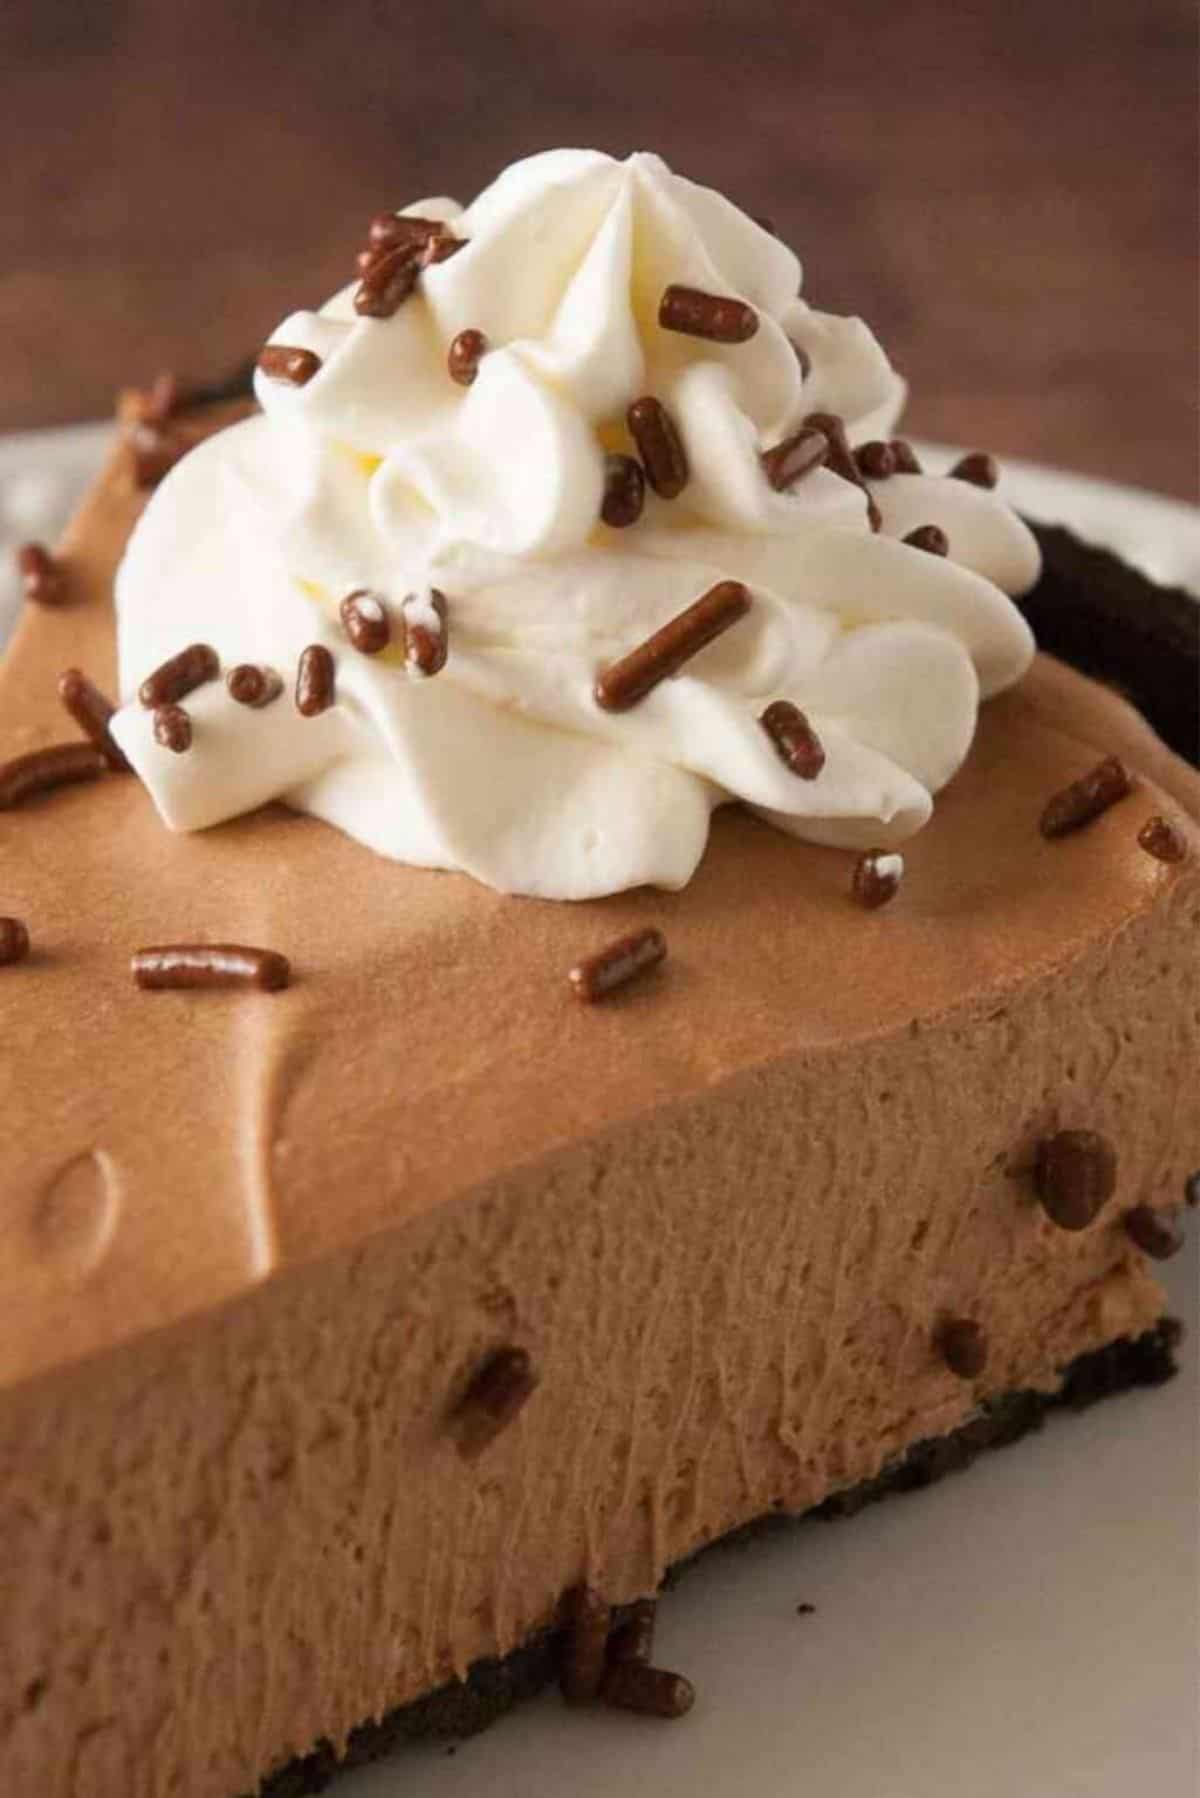 A piece of Irresistible Chocolate Mousse Pie on a white plate.